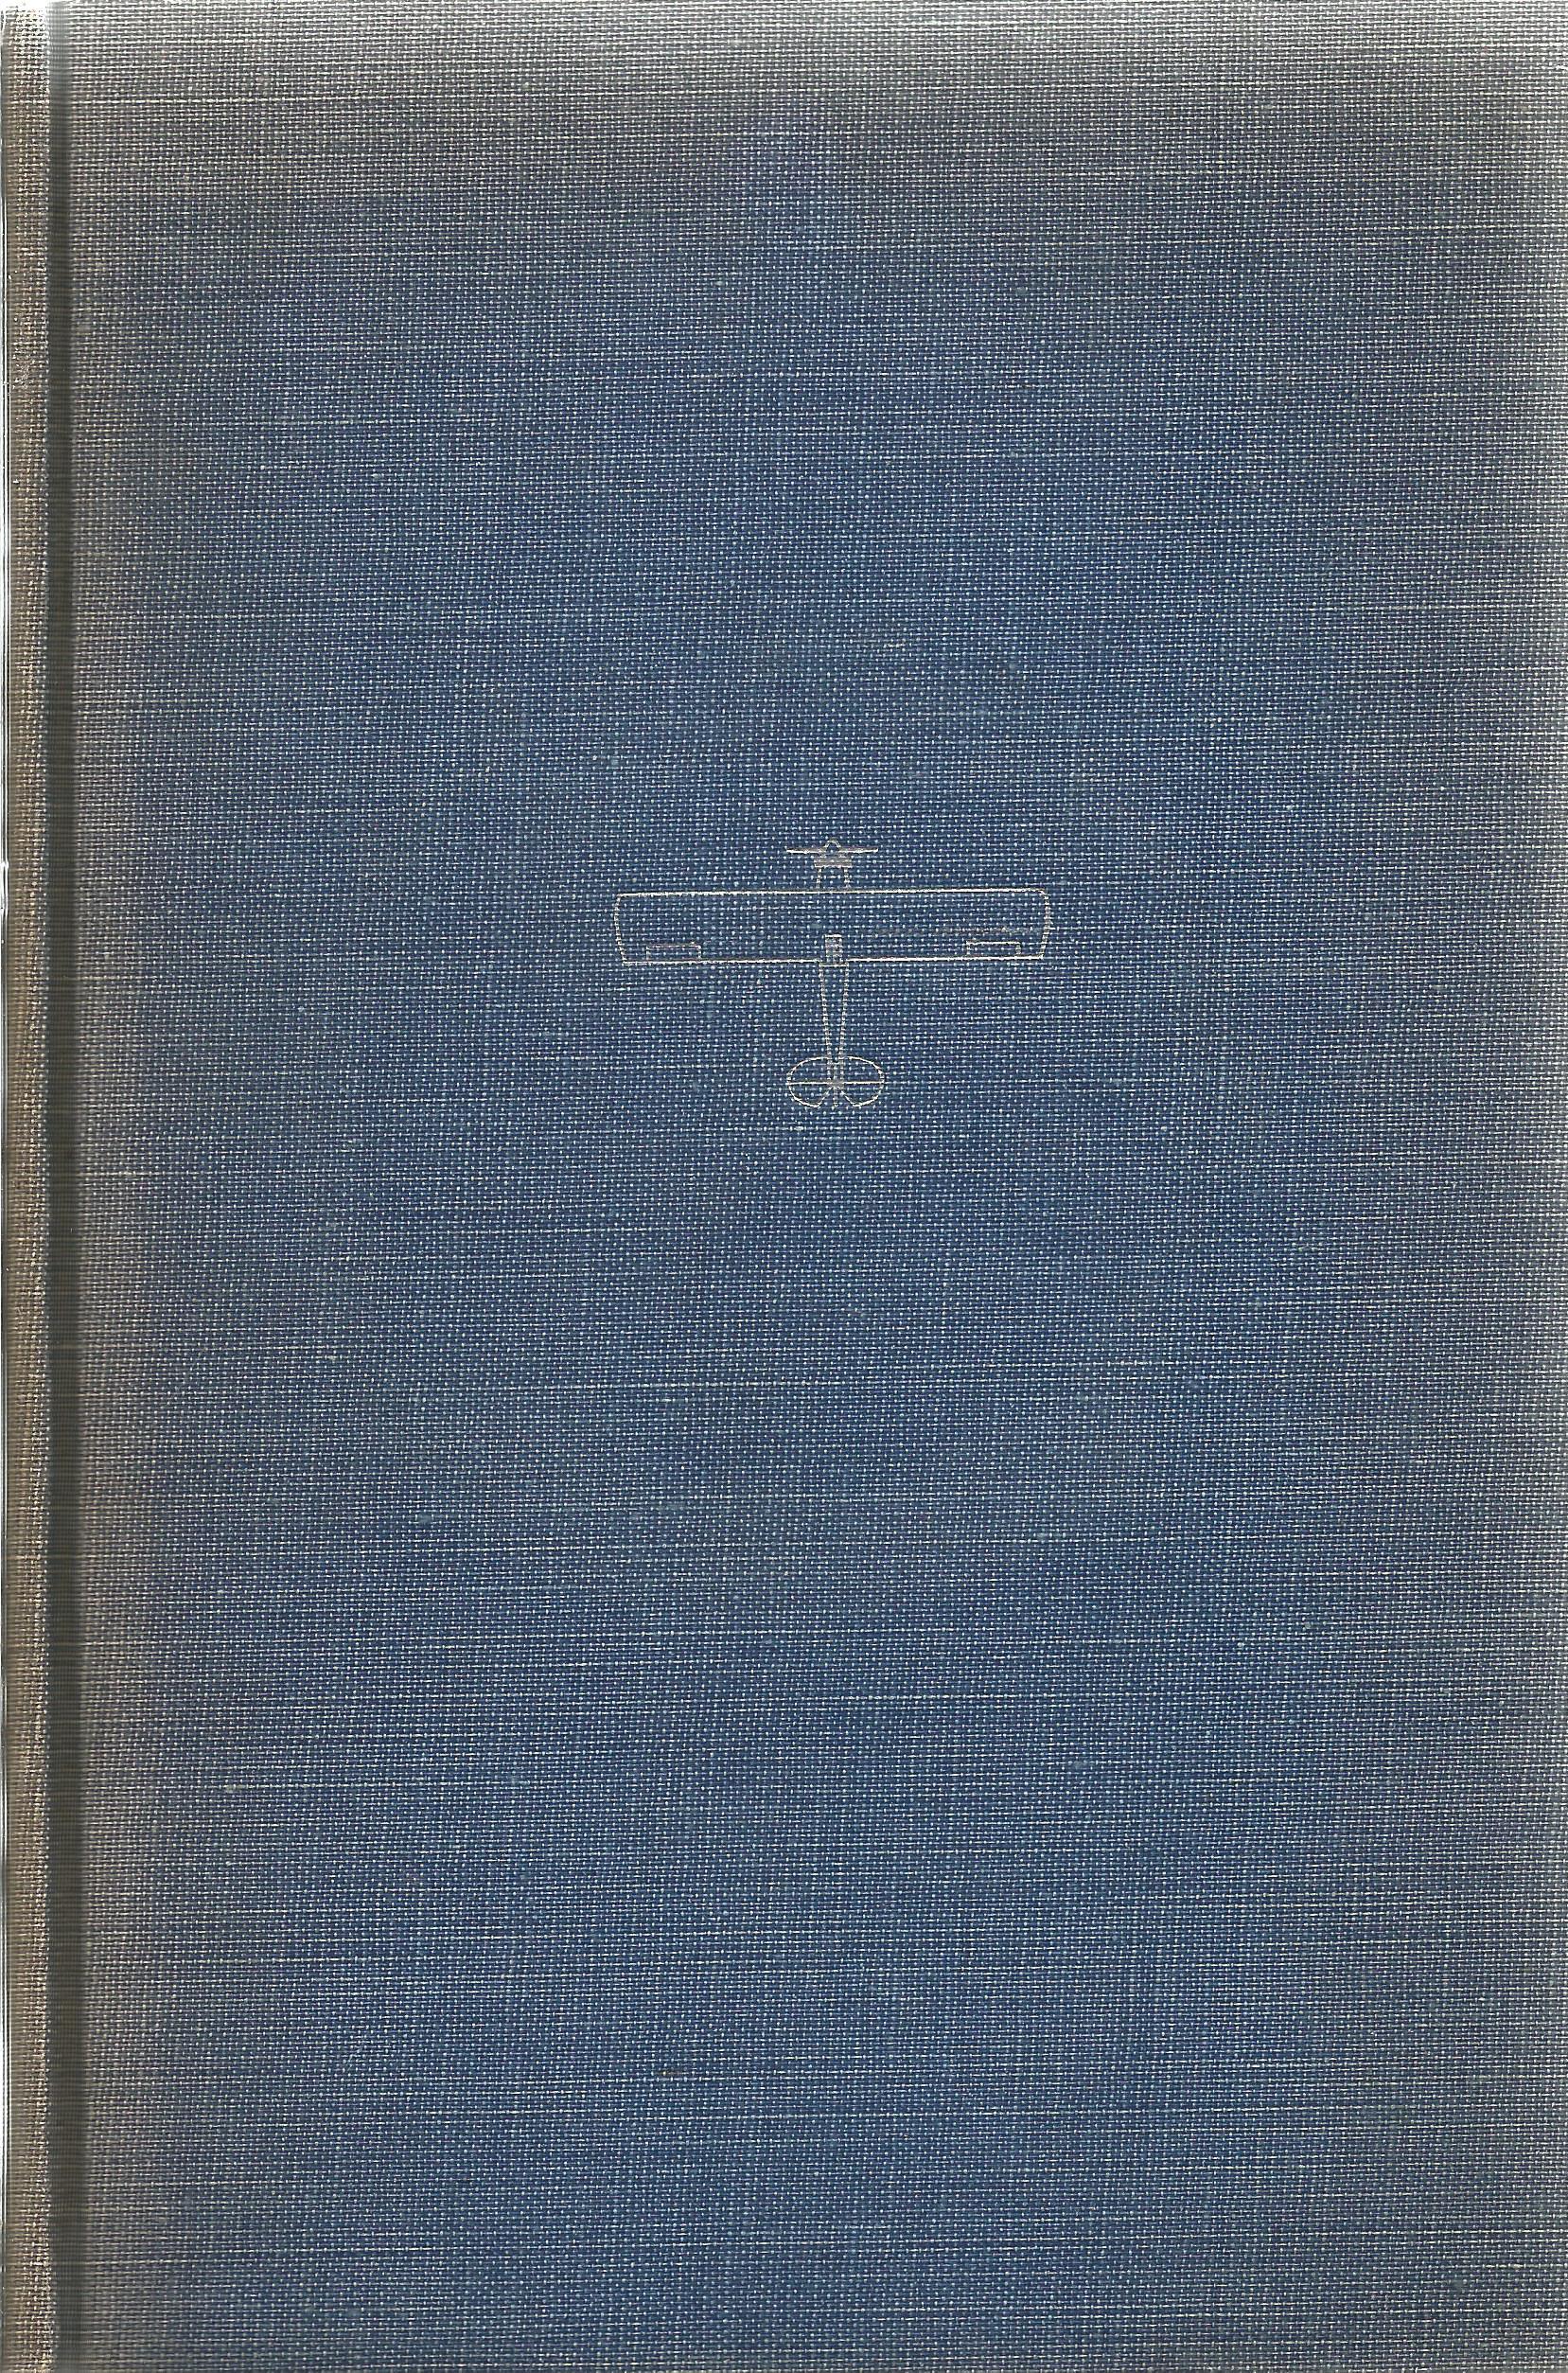 The Spirit of St Louis by Charles A Lindbergh 1953 First Edition Hardback Book published by